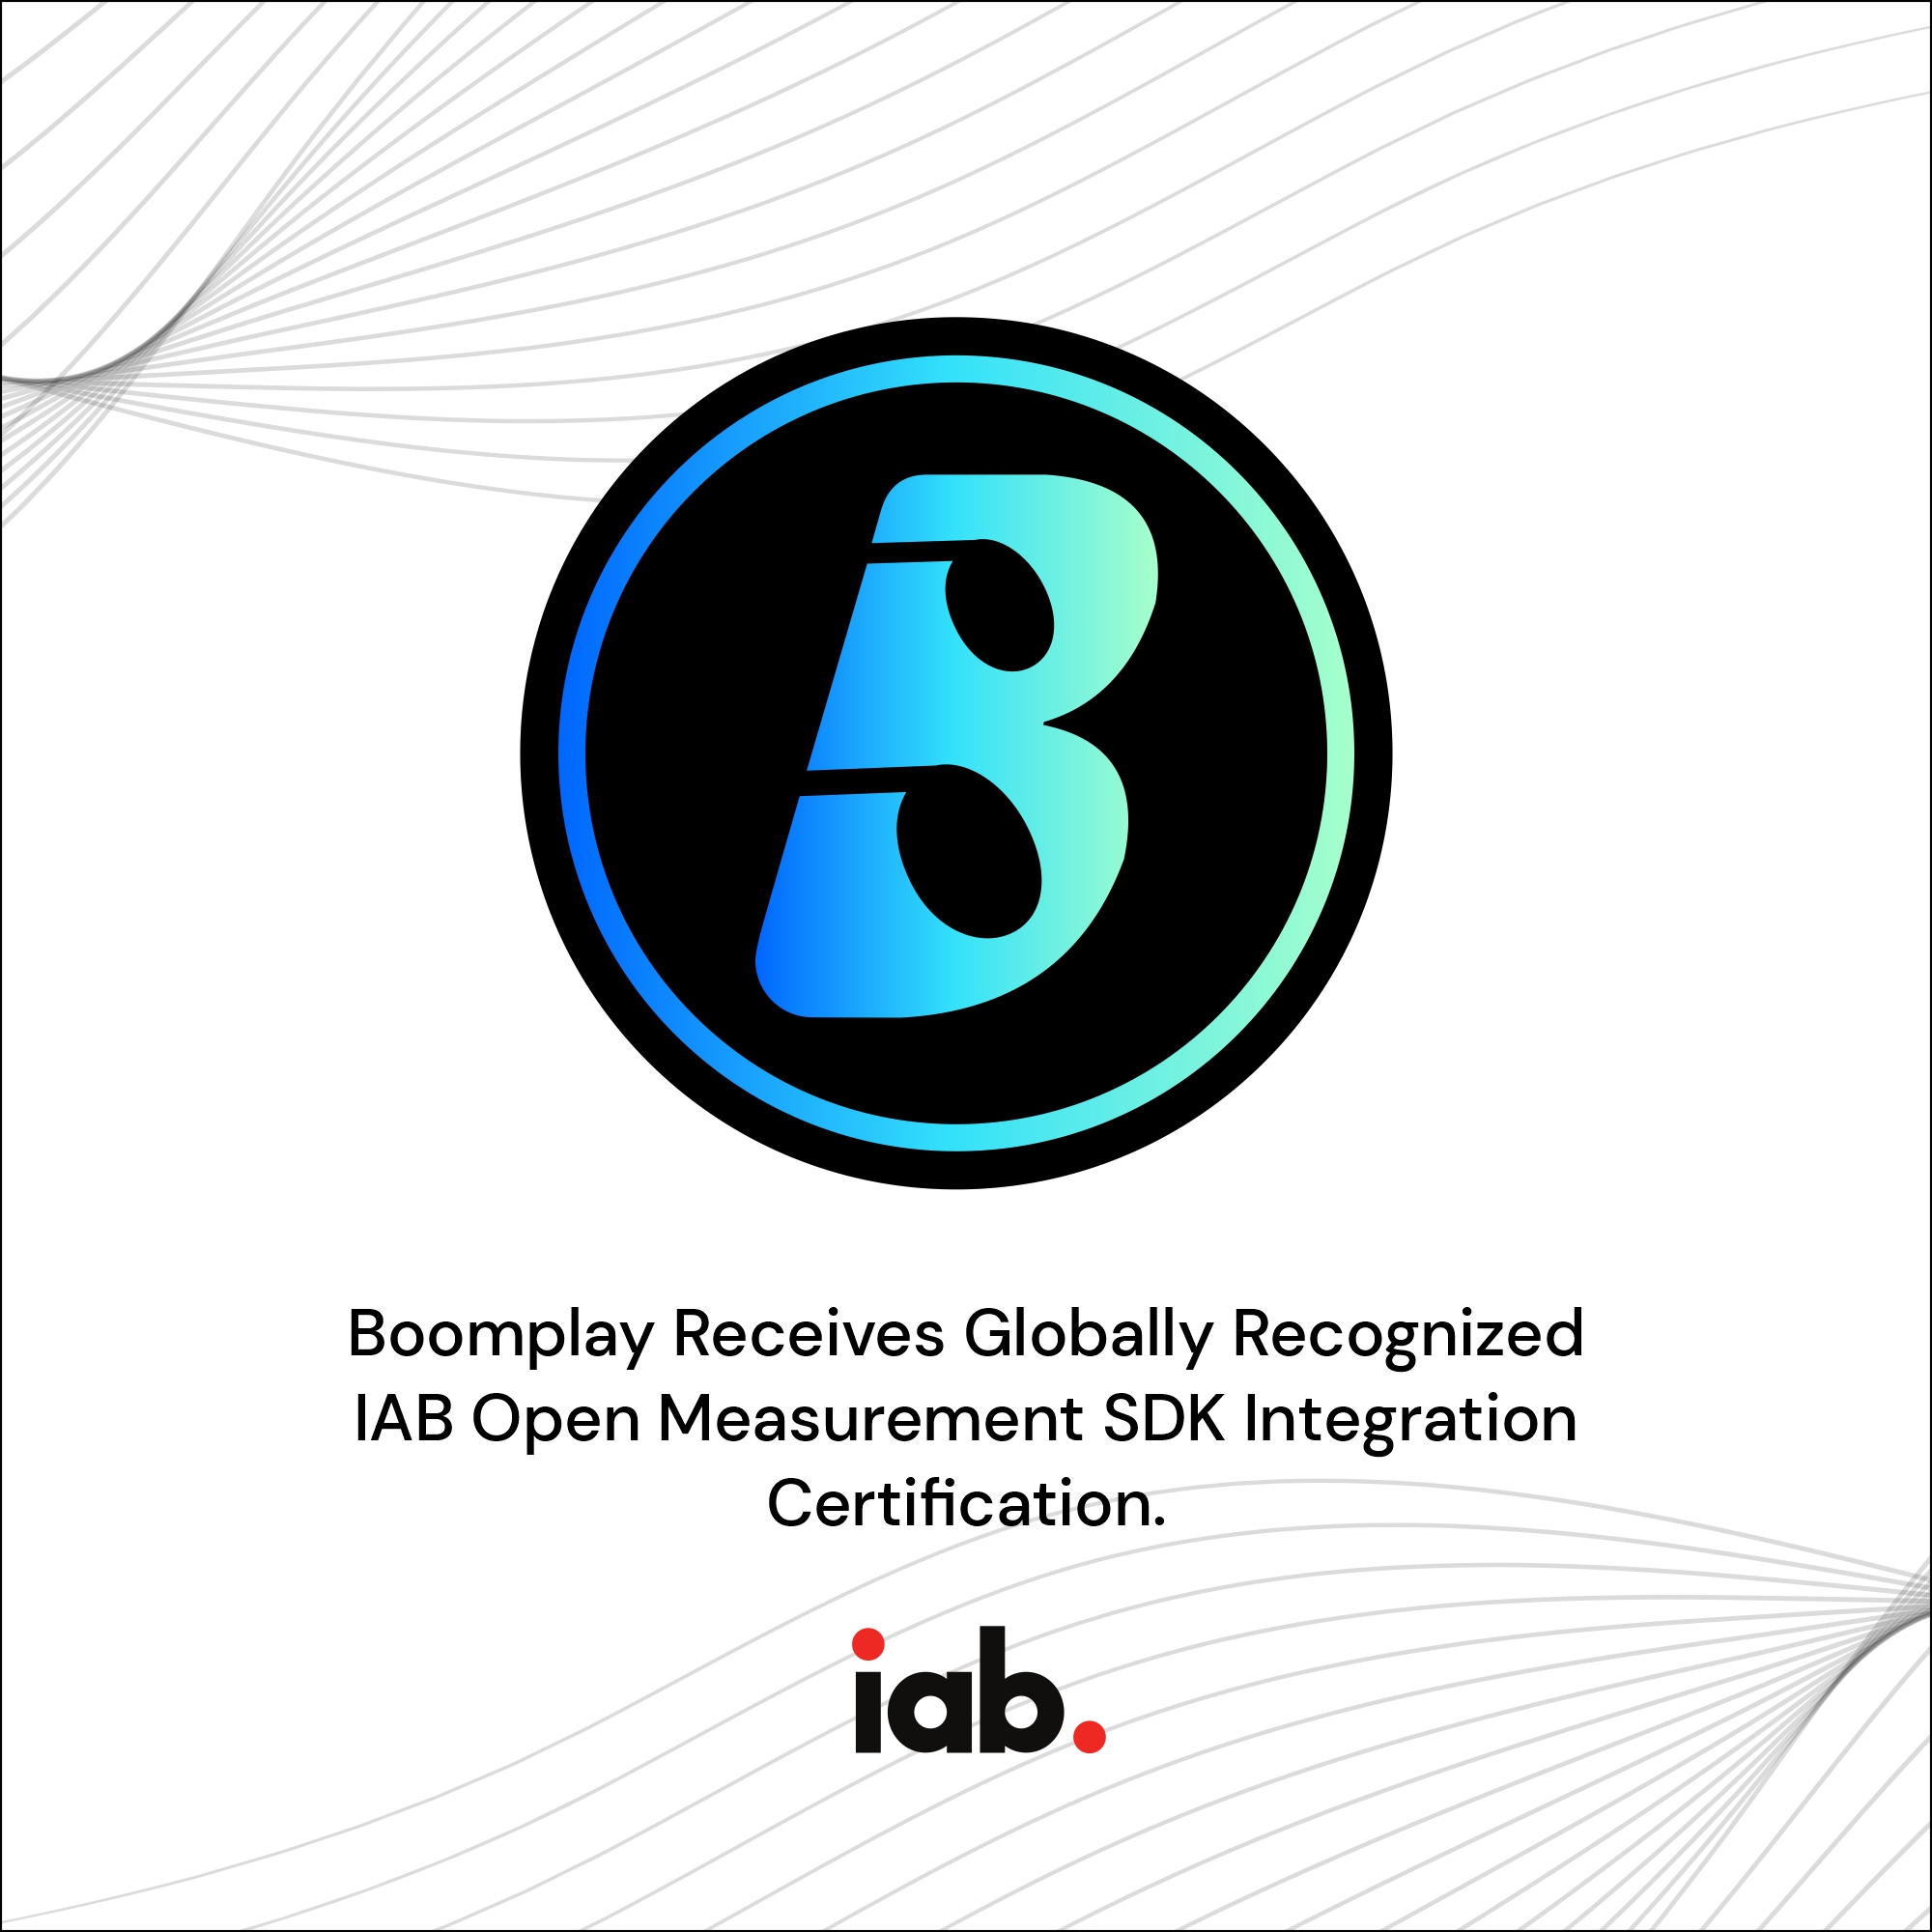 Boomplay Receives Globally Recognized IAB Open Measurement SDK Integration Certification